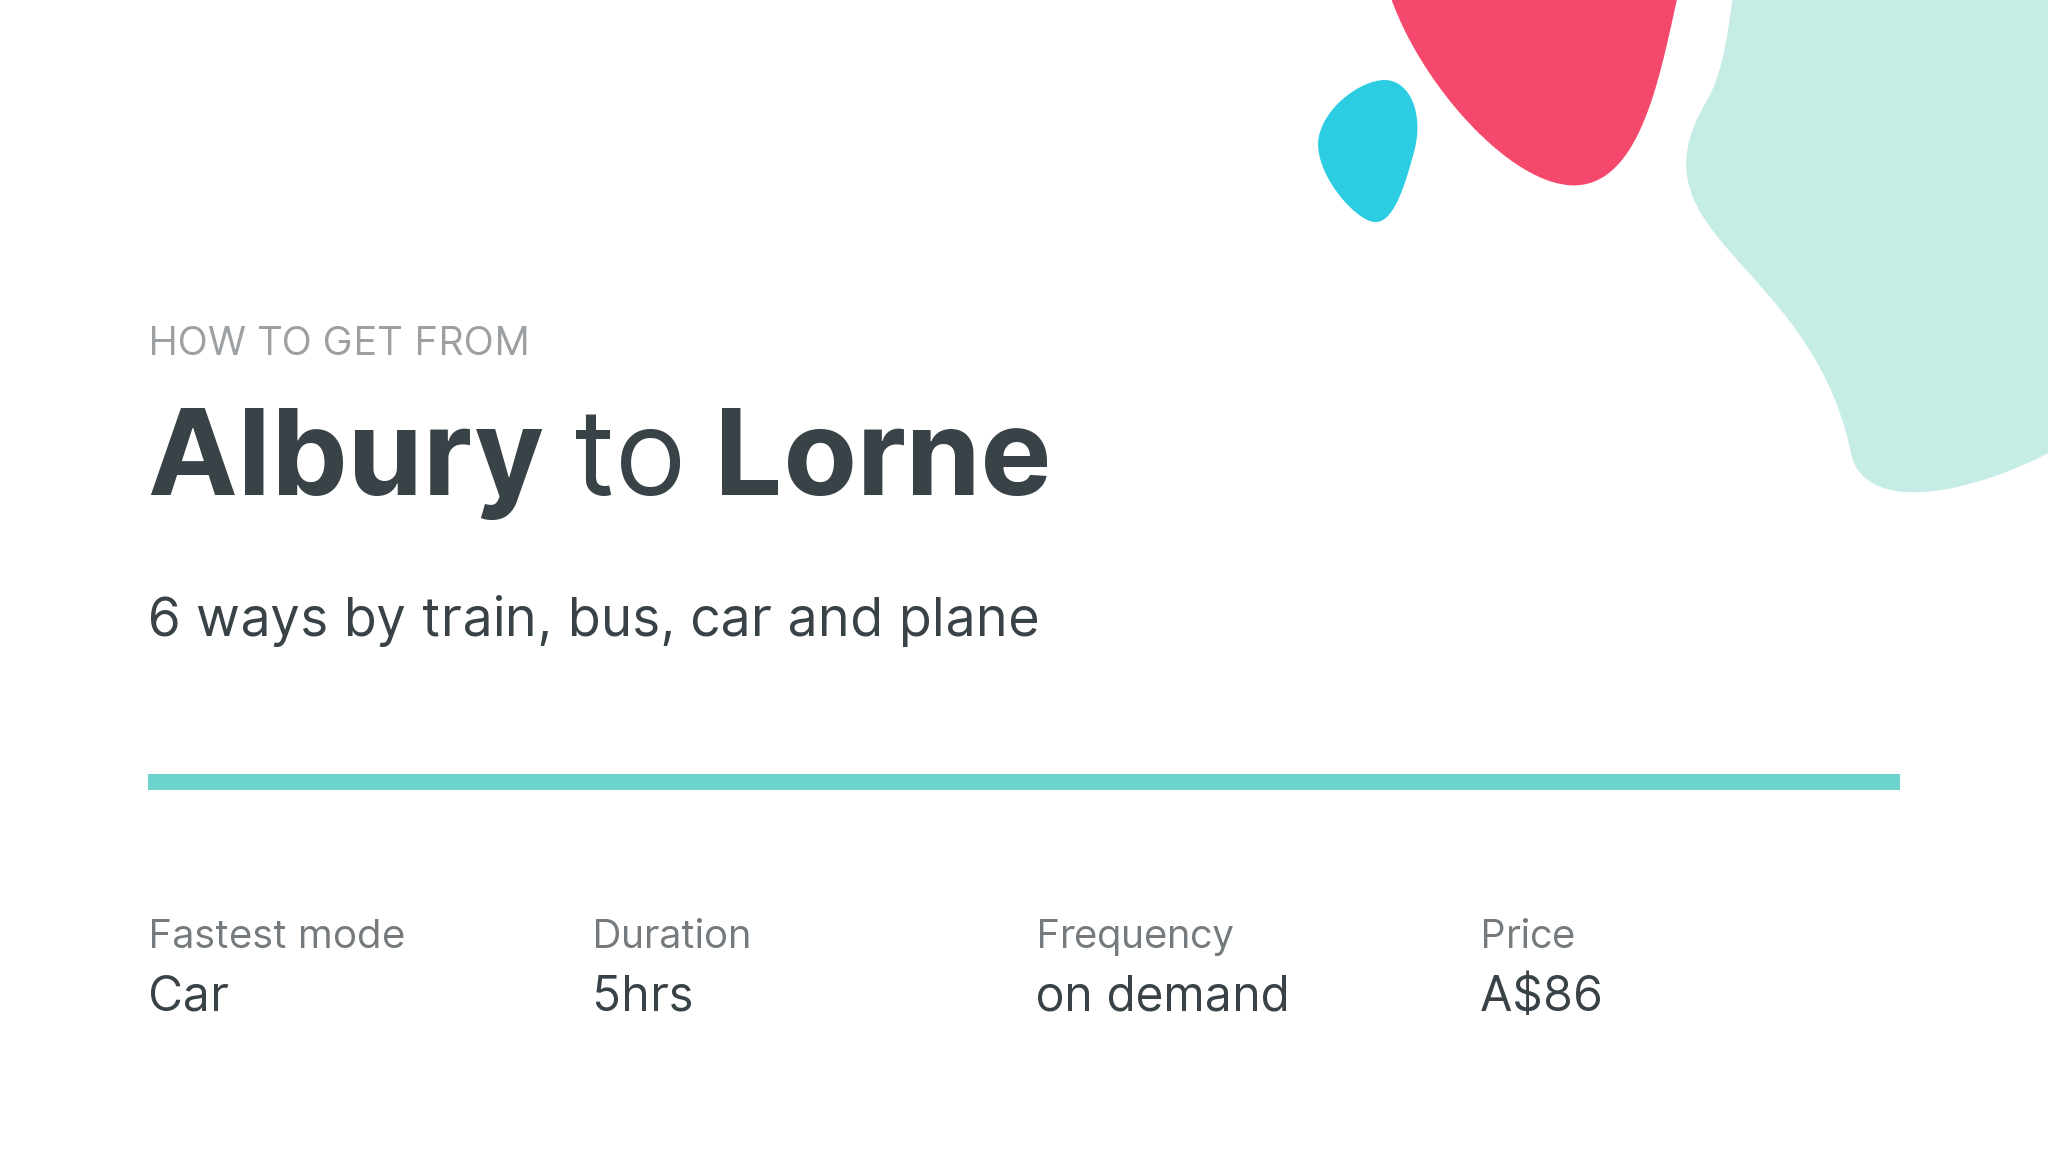 How do I get from Albury to Lorne